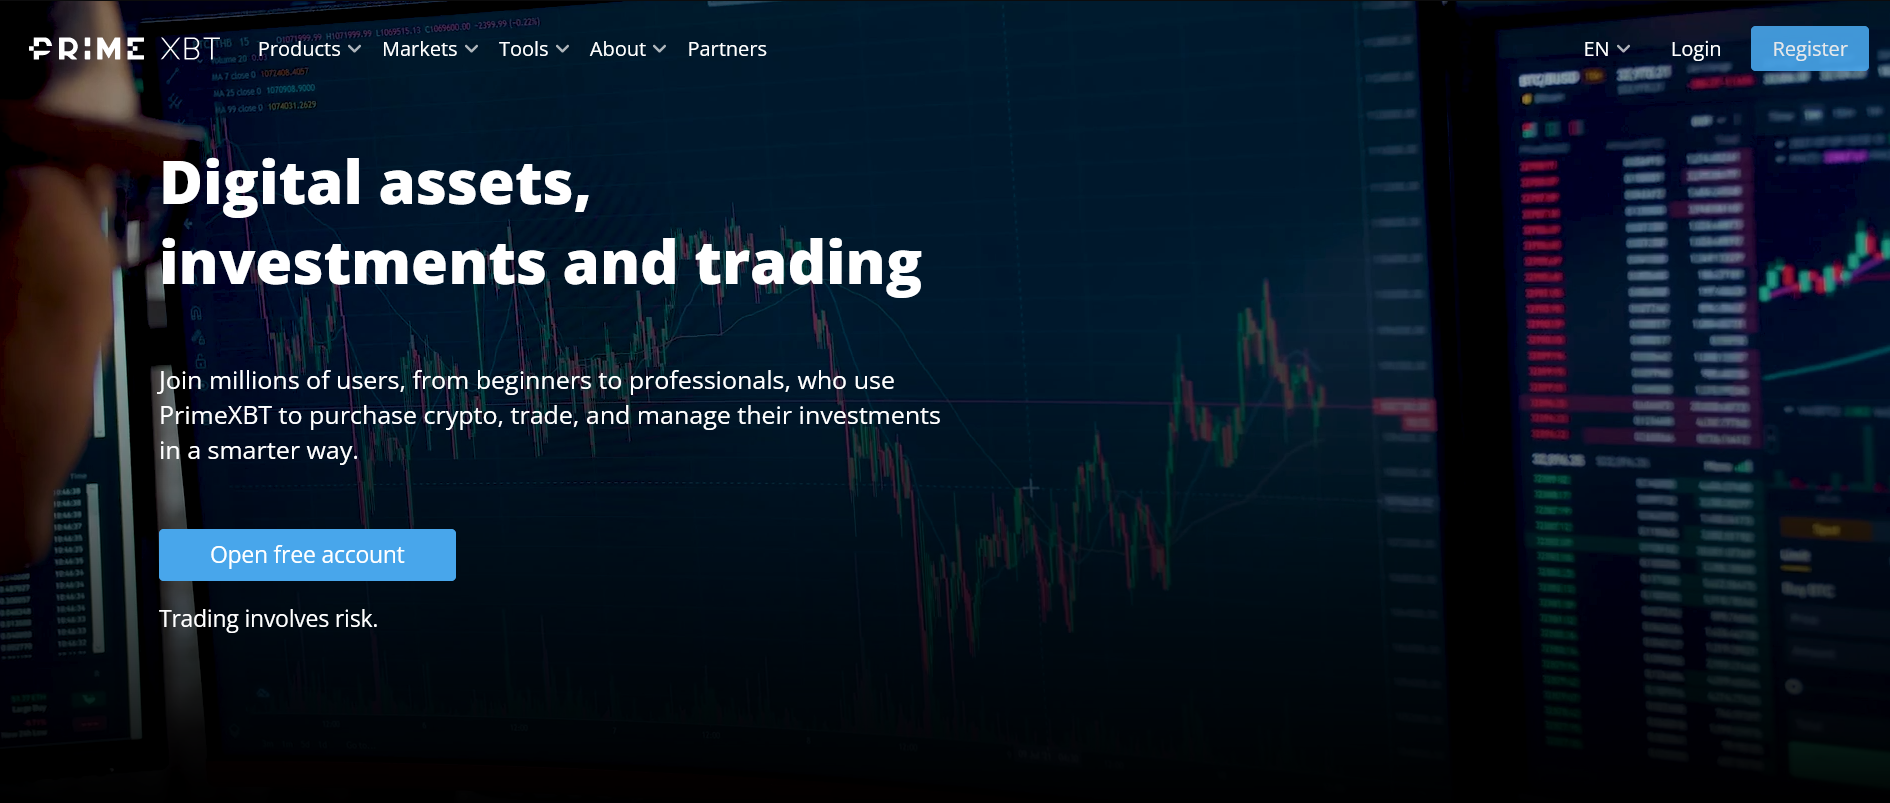 Crypto day trading: strategies, risks, and rewards - e373ef24 f5ff 4003 980d d369538d8503